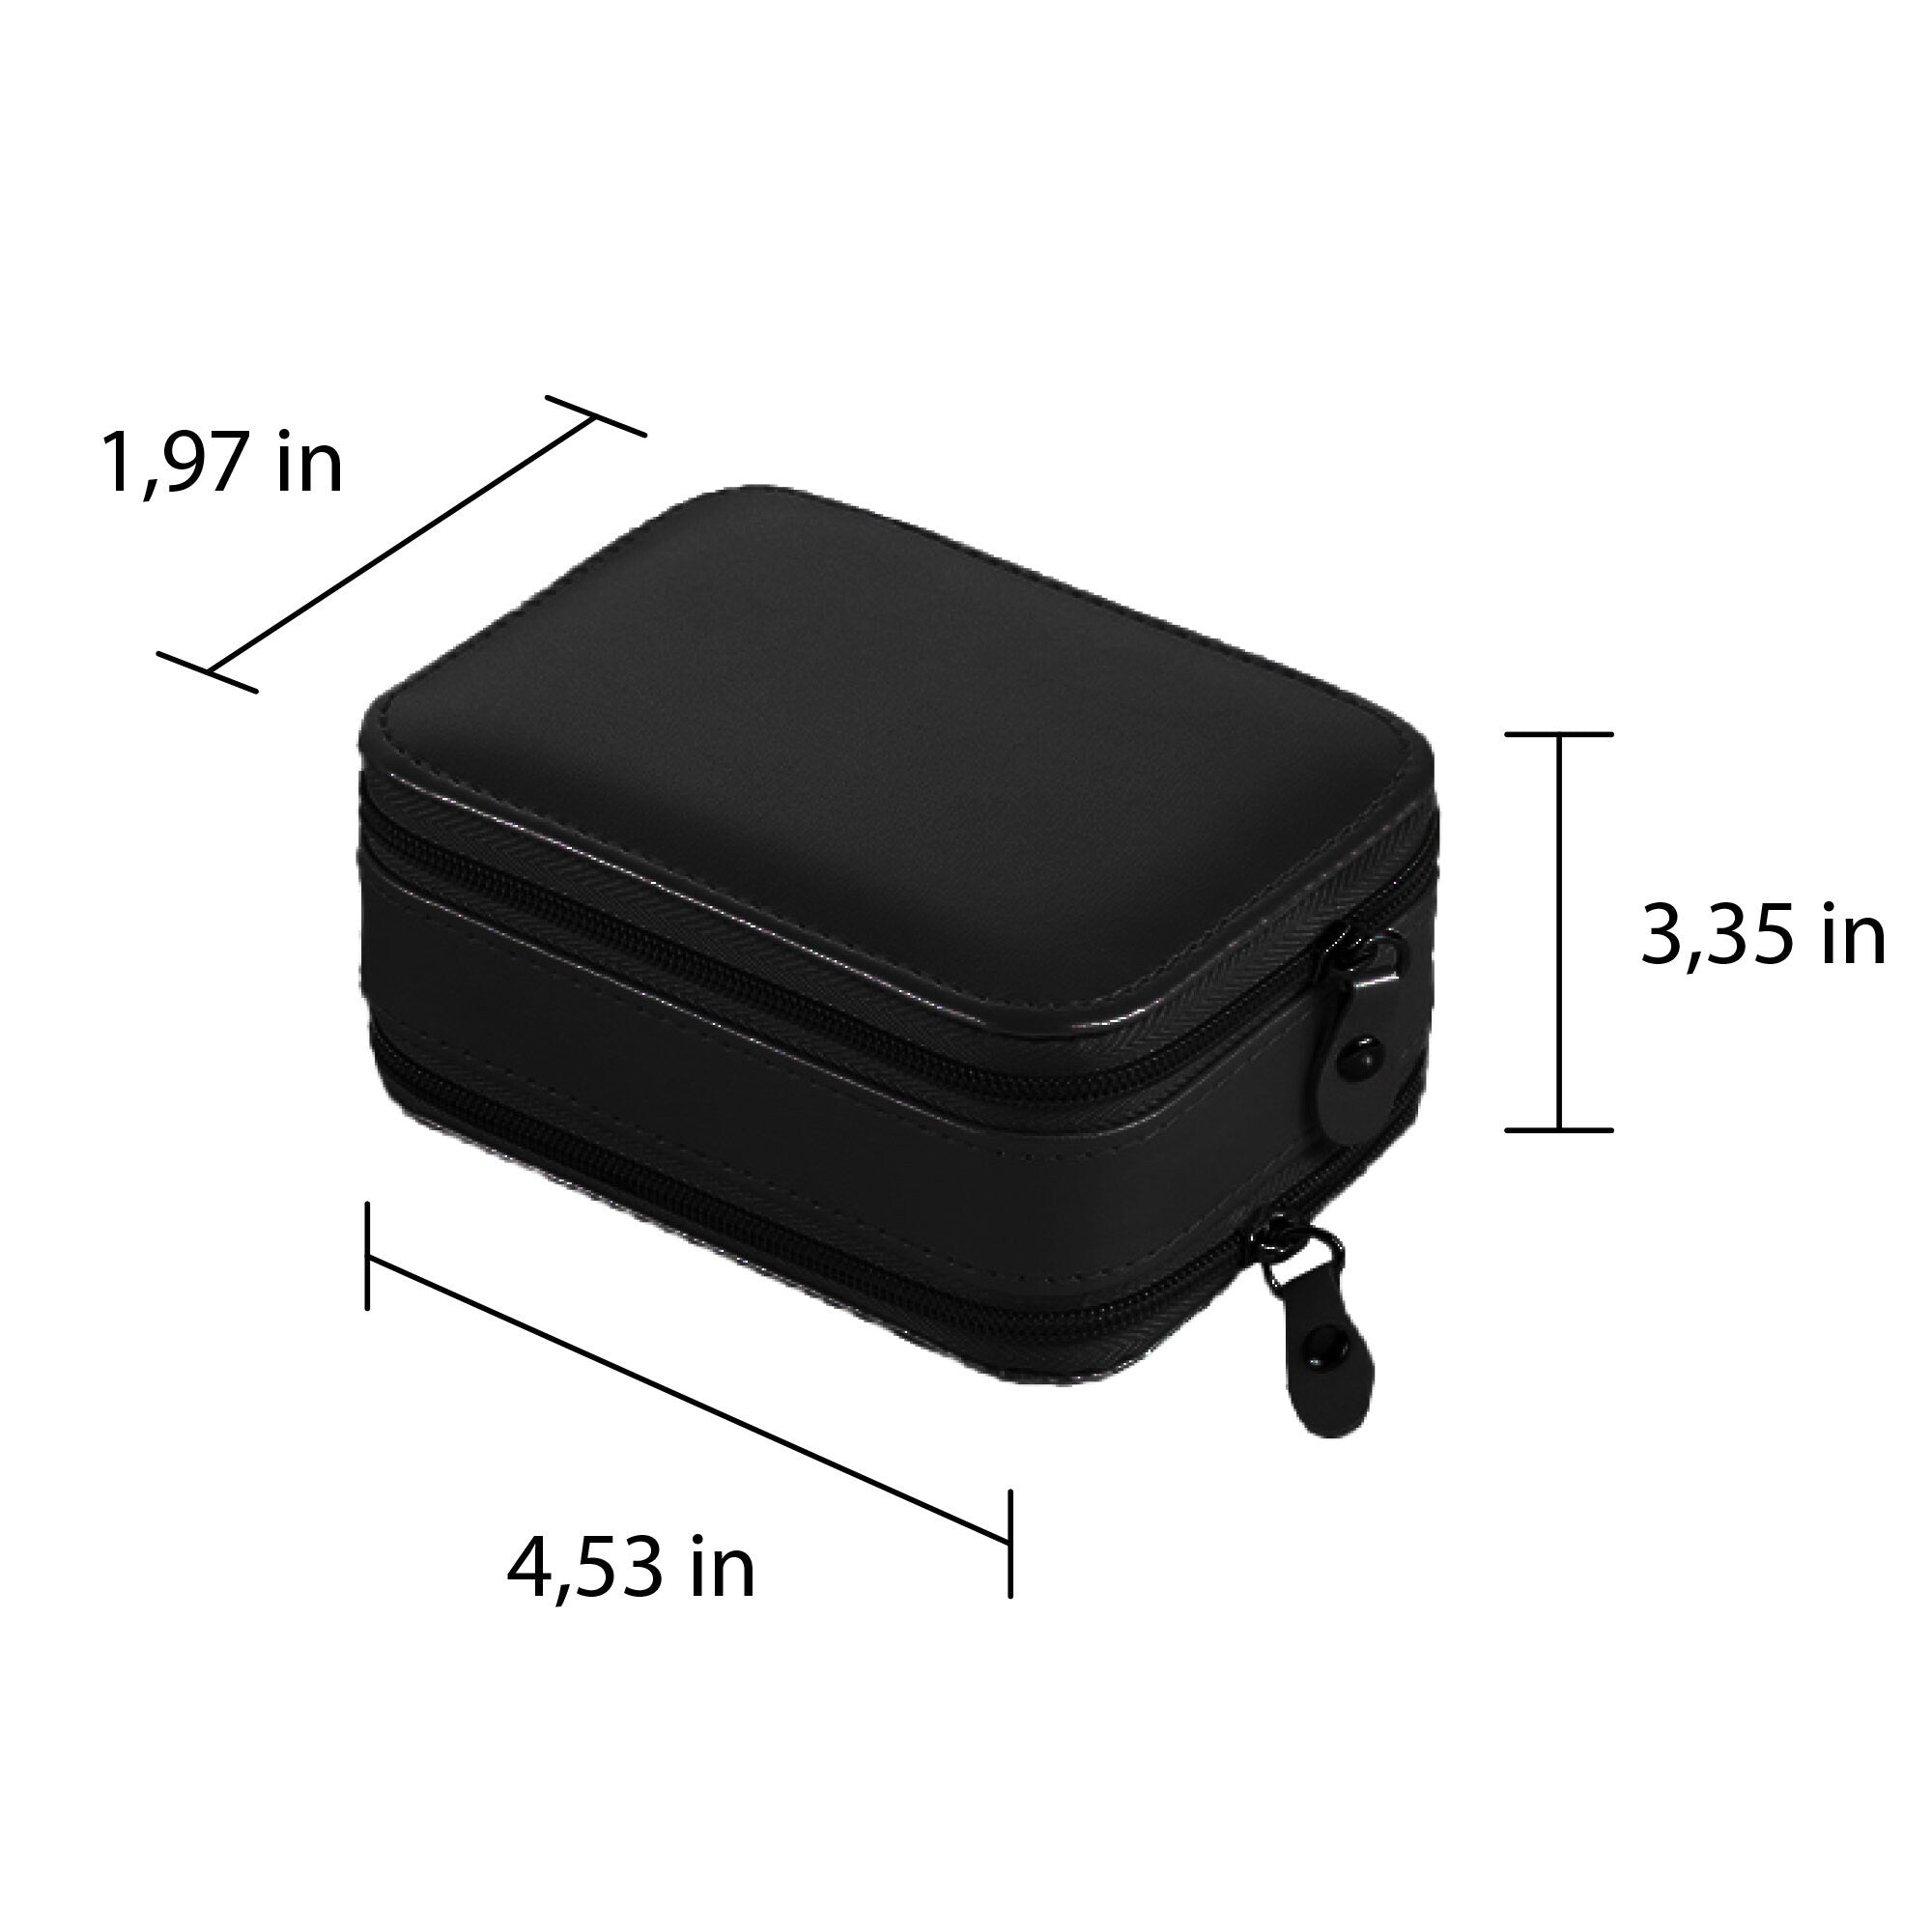 a black case is shown with measurements for it